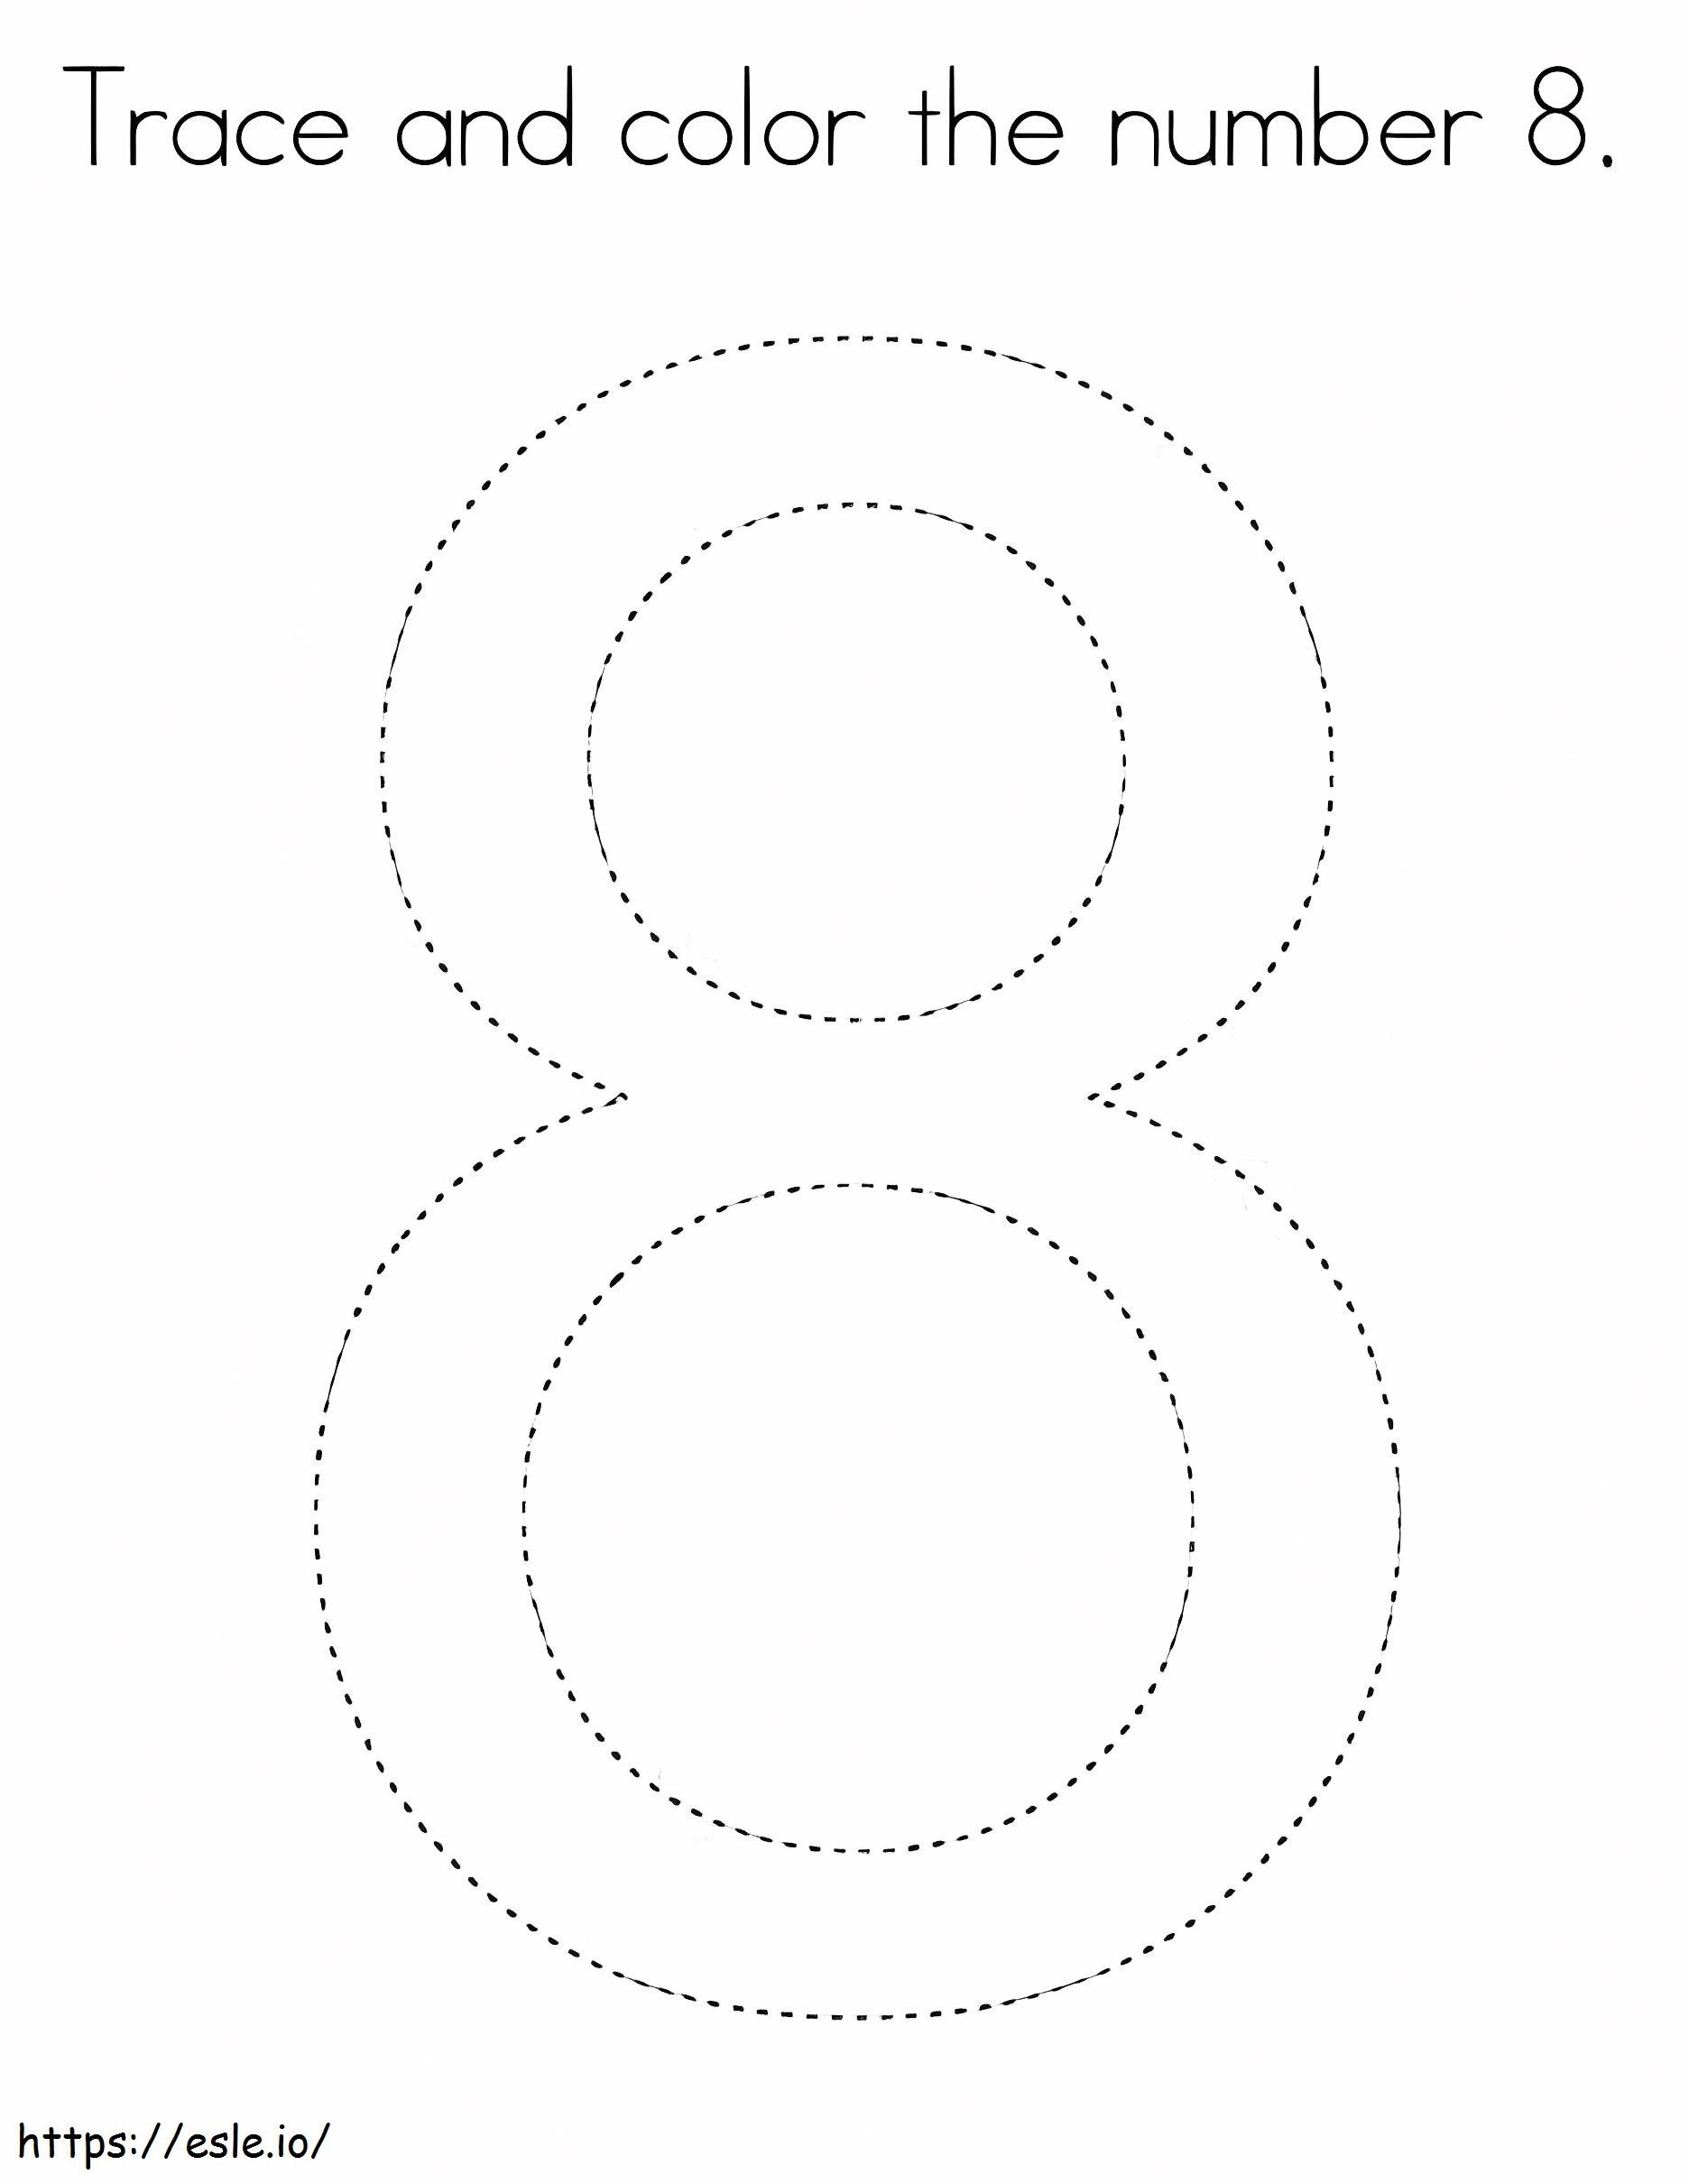 Number 8 Tracing coloring page